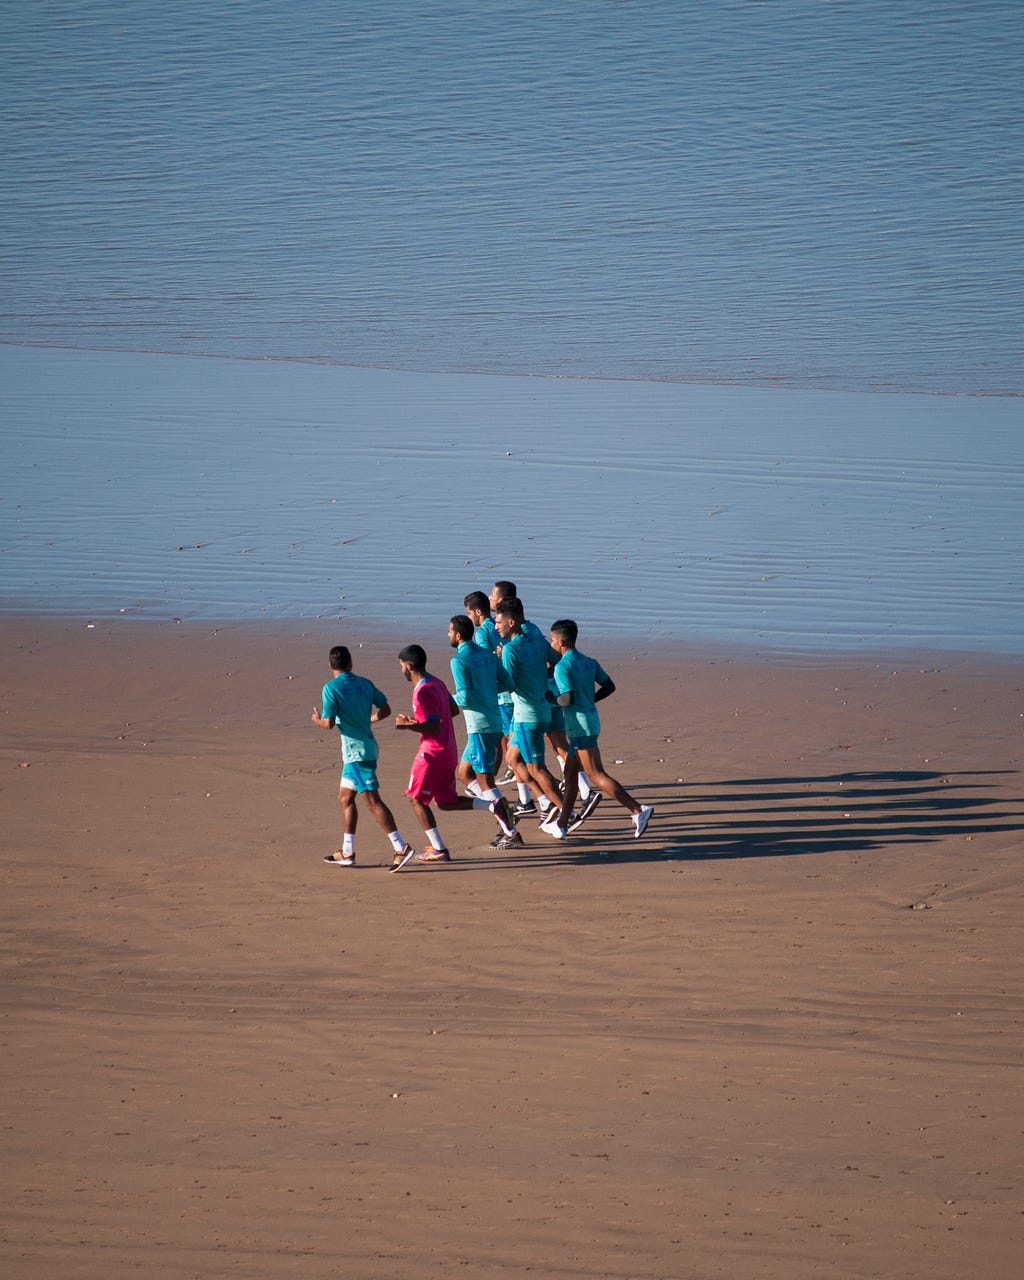 A group of men running on the beach. One man is dressed in red, the others in blue.